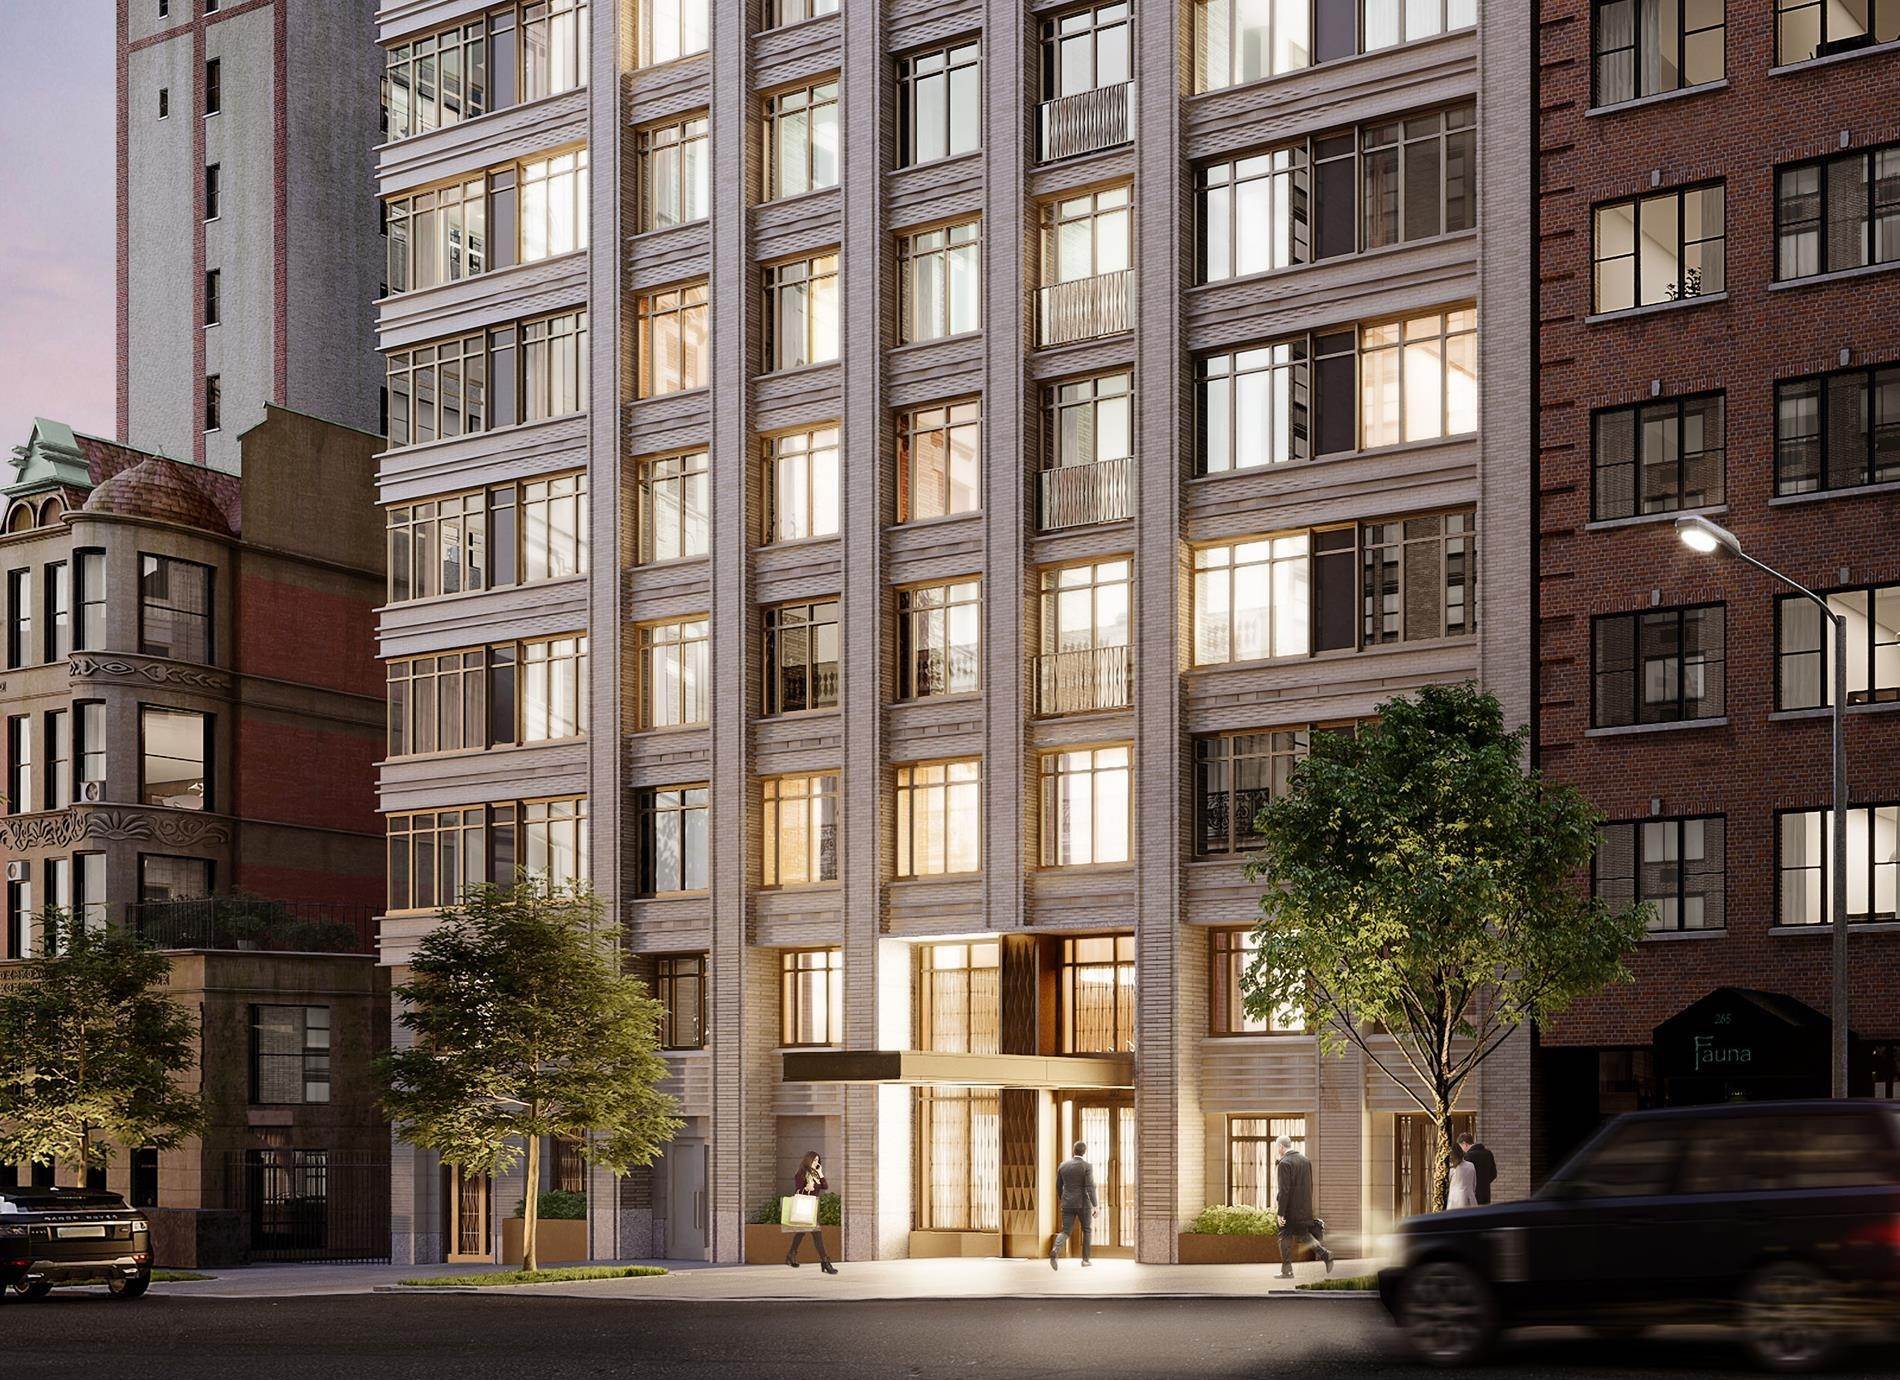 The Chamberlain building at 269 West 87th Street, Upper West Side, Manhattan, NY 10024